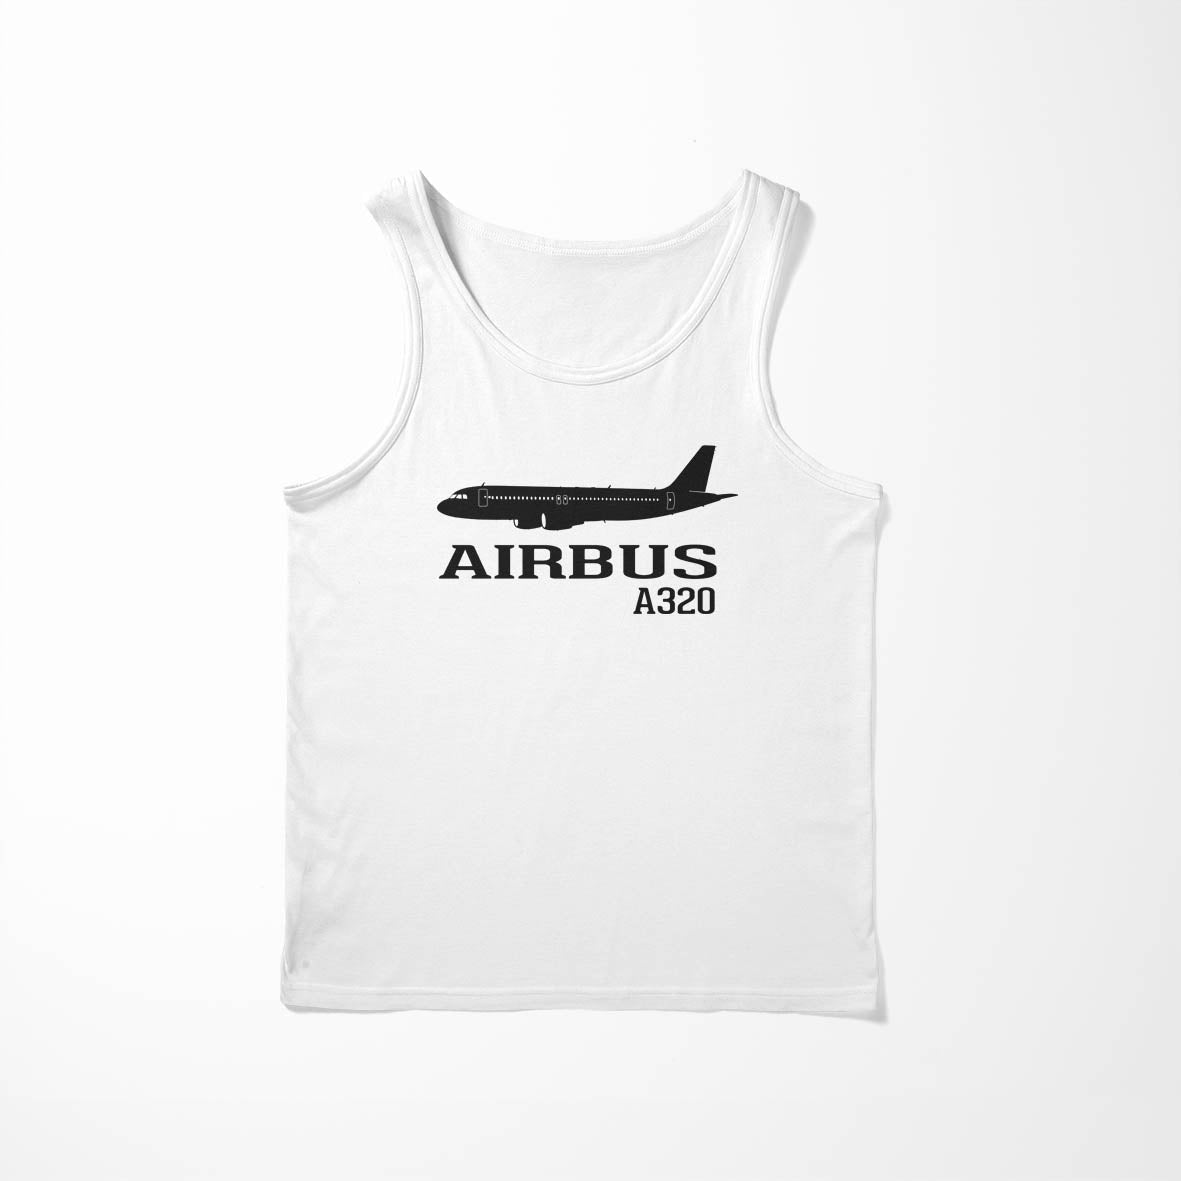 Airbus A320 Printed & Designed Tank Tops